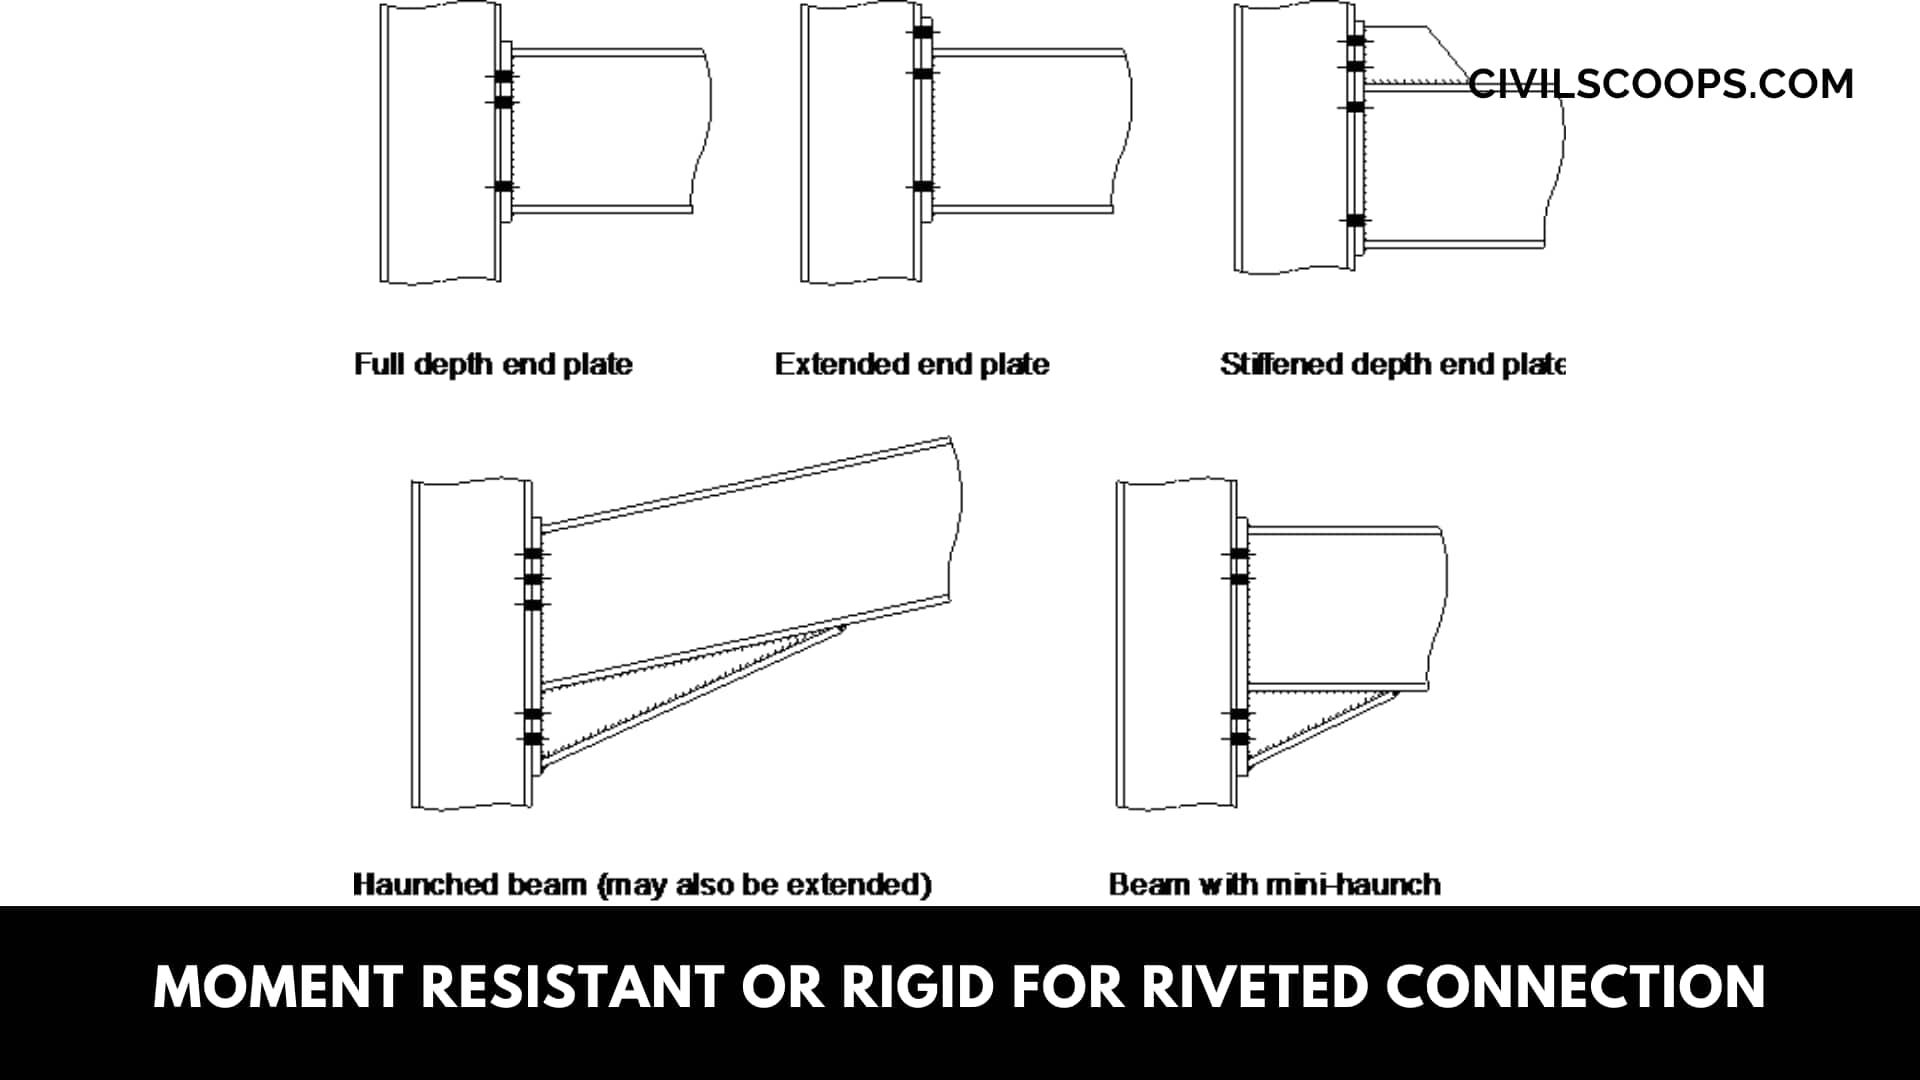 Moment Resistant or Rigid for Riveted Connection